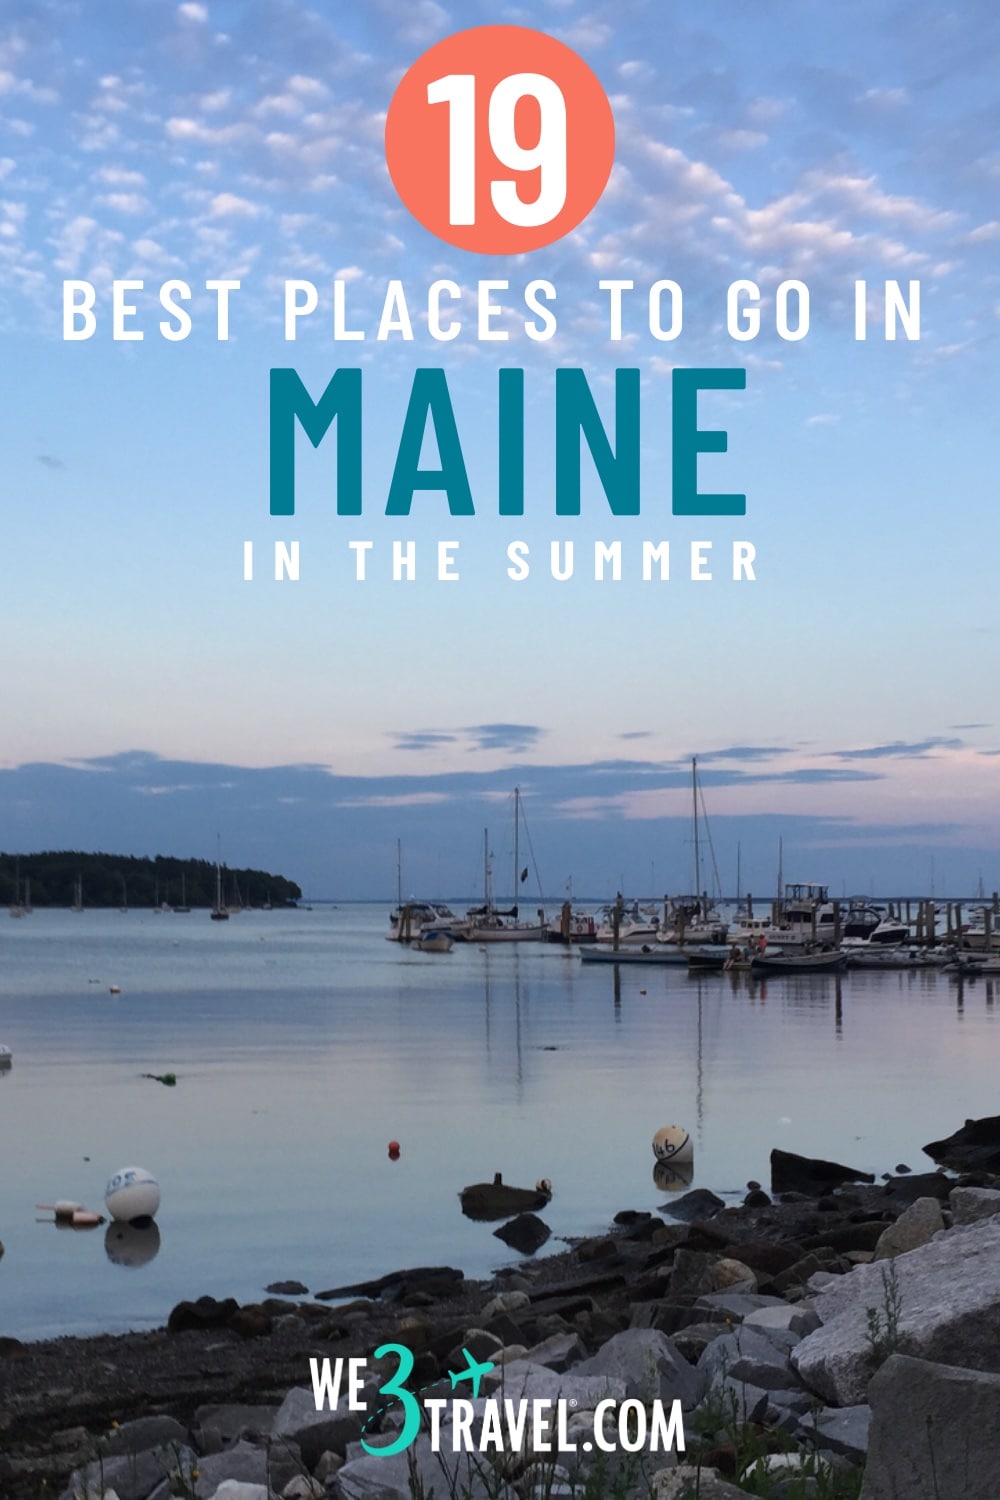 Dreaming of exploring Maine’s rocky coastlines, lighthouses, and fresh seafood on a Maine vacation? Make your Maine trip a reality, choose from one of these best places to go to in Maine in the summer. Whether you are looking for a New England family vacation or a weekend getaway, Maine has something for everyone from rocky coastlines, sandy beaches, gorgeous lakes, and climbable mountains.
